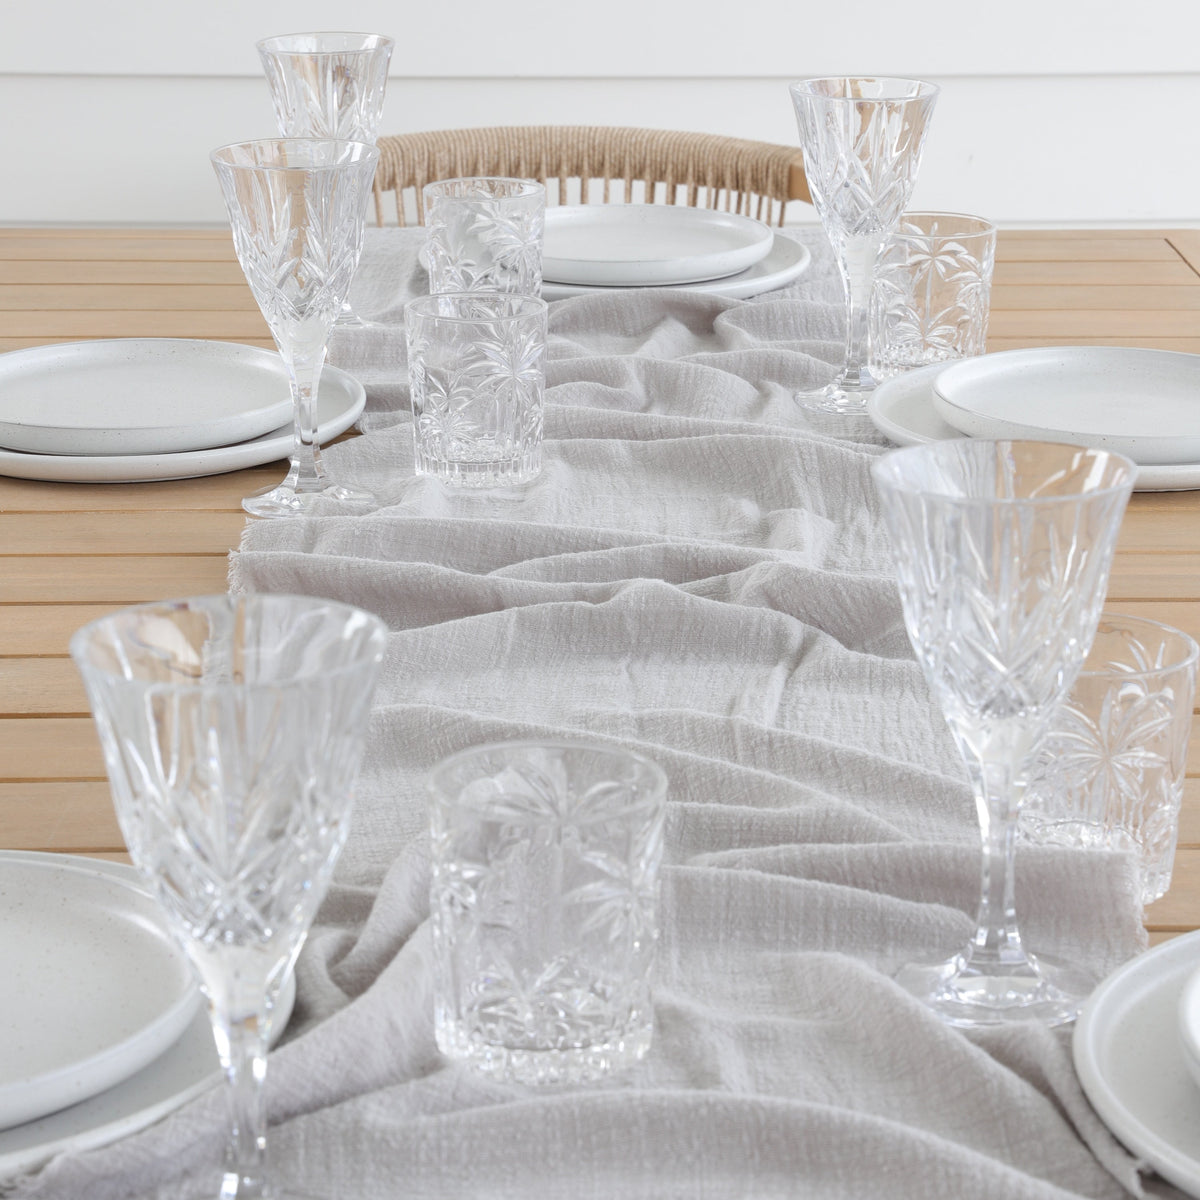 Light Grey Rustic Cotton Table Runners - 3m